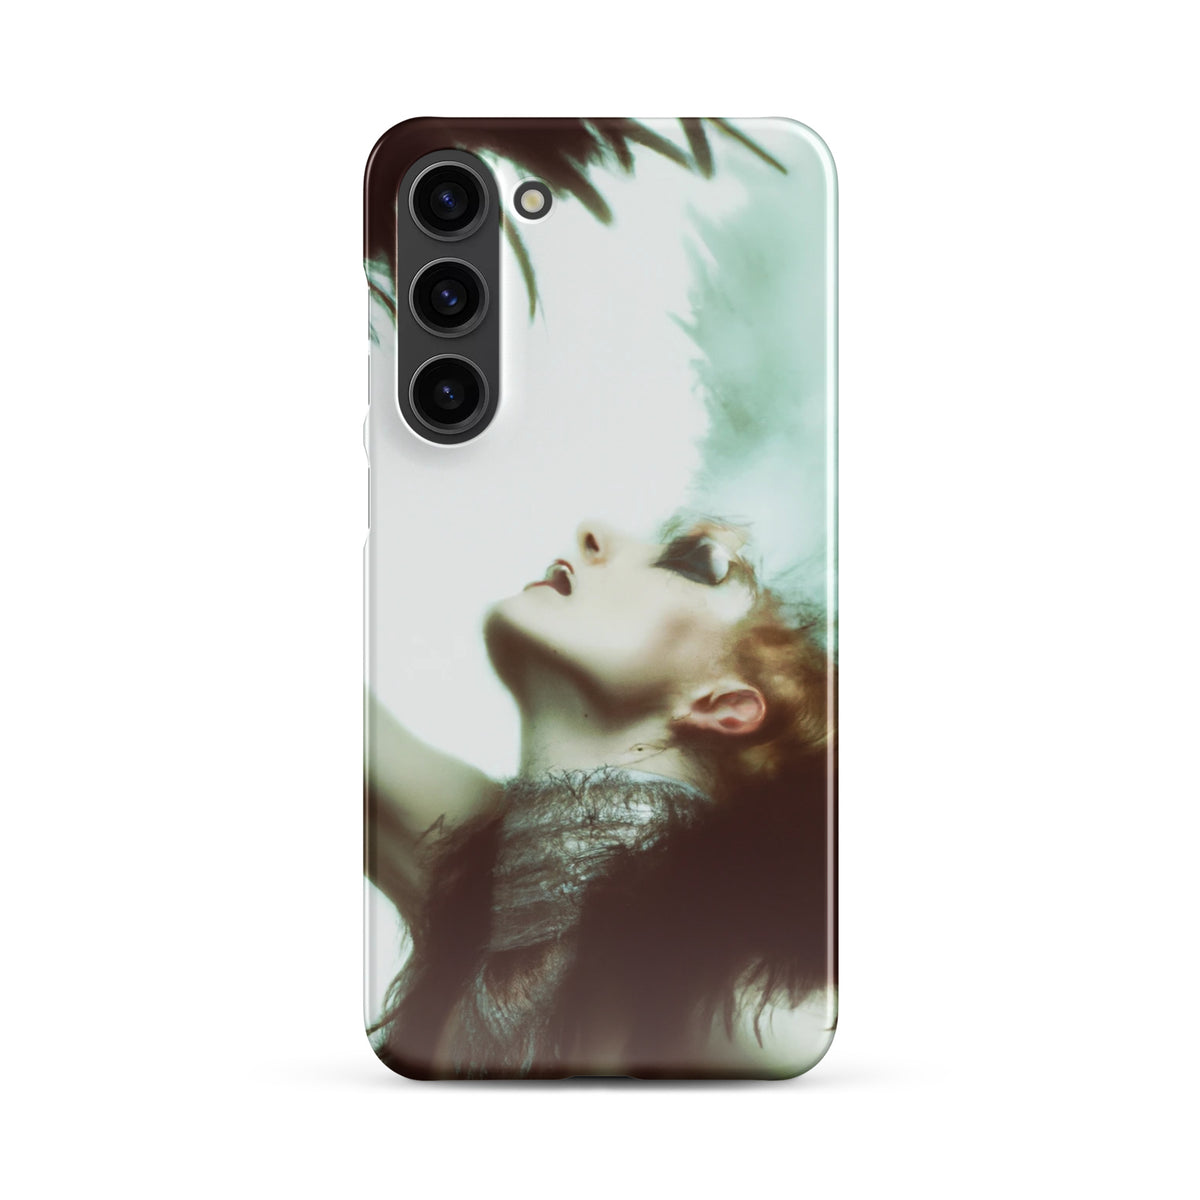  Samsung Phone case with a Follies Bergere dancer with lots of plumage